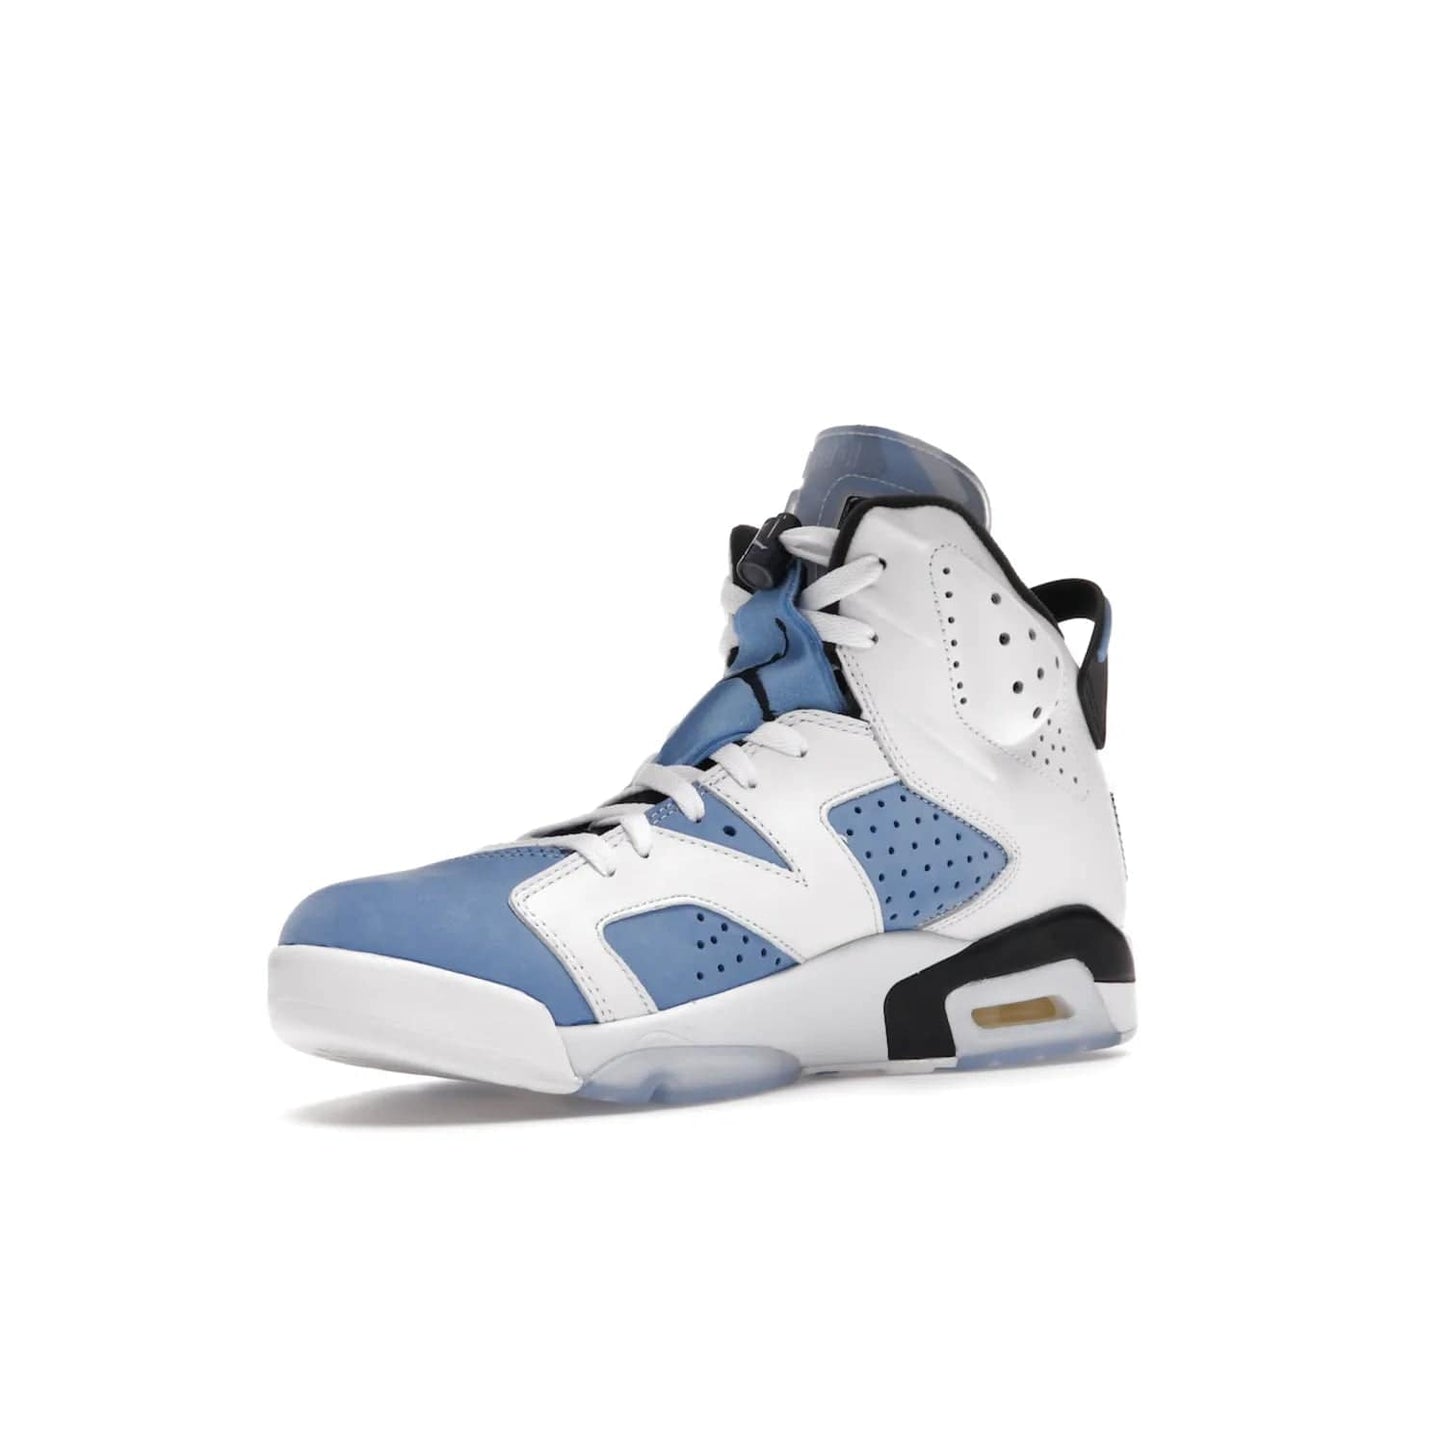 Jordan 6 Retro UNC White - Image 15 - Only at www.BallersClubKickz.com - Air Jordan 6 Retro UNC White with classic UNC colors brings nostalgia and style to a legendary silhouette. Celebrate MJ's alma mater with navy blue accents, icy semi-translucent sole and Jordan Team patch. Out March 2022 for the Sneaker Enthusiast.